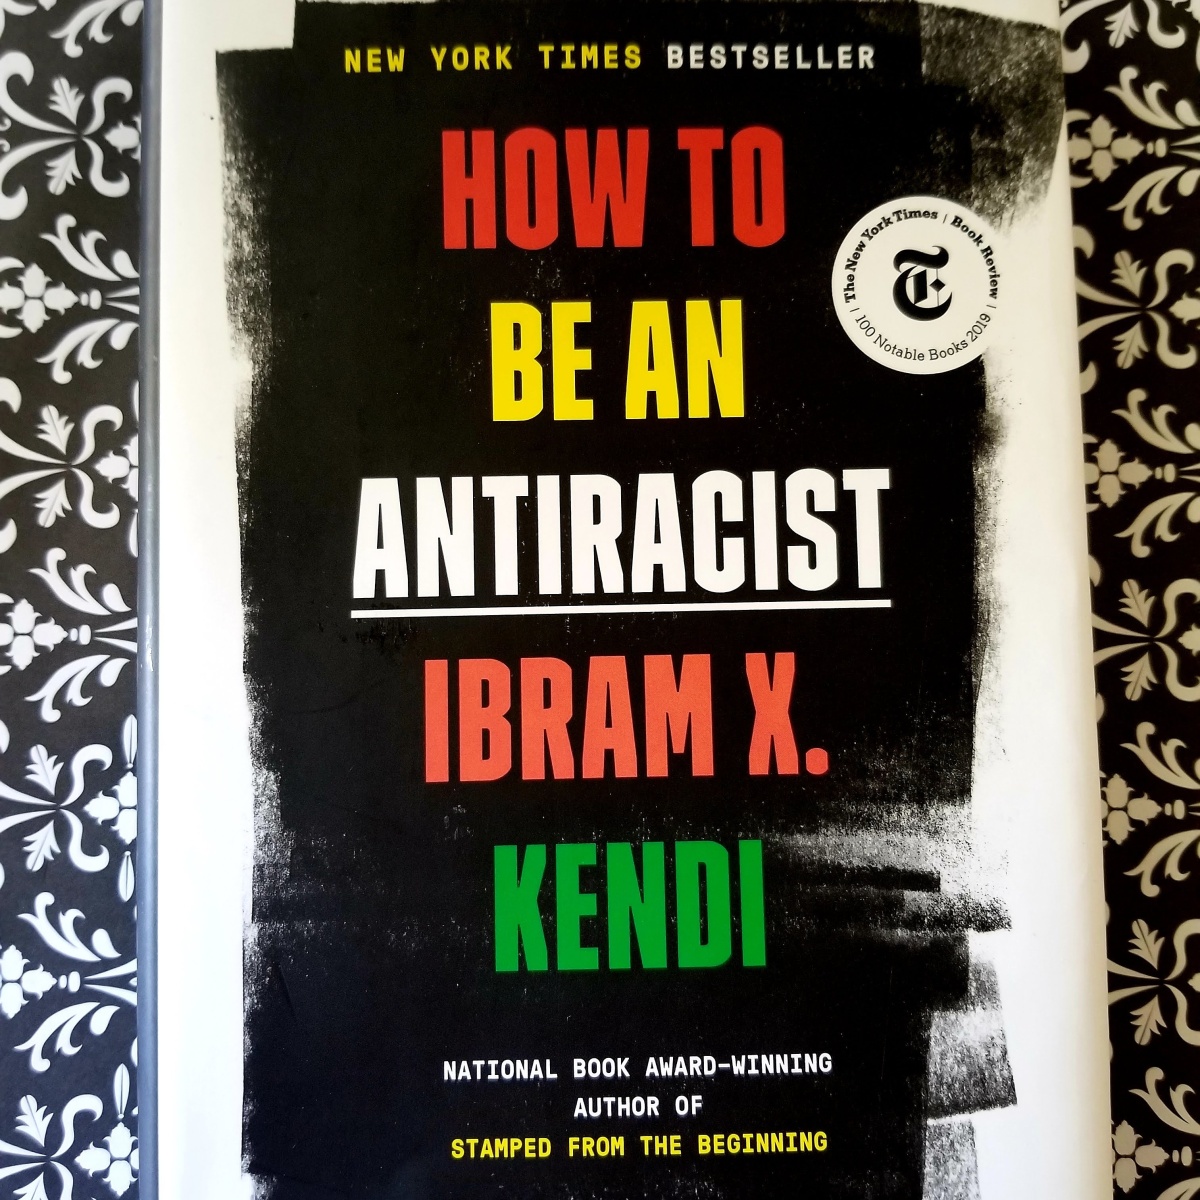 5 Things I Learned from “How to be an Antiracist” by Ibram X. Kendi